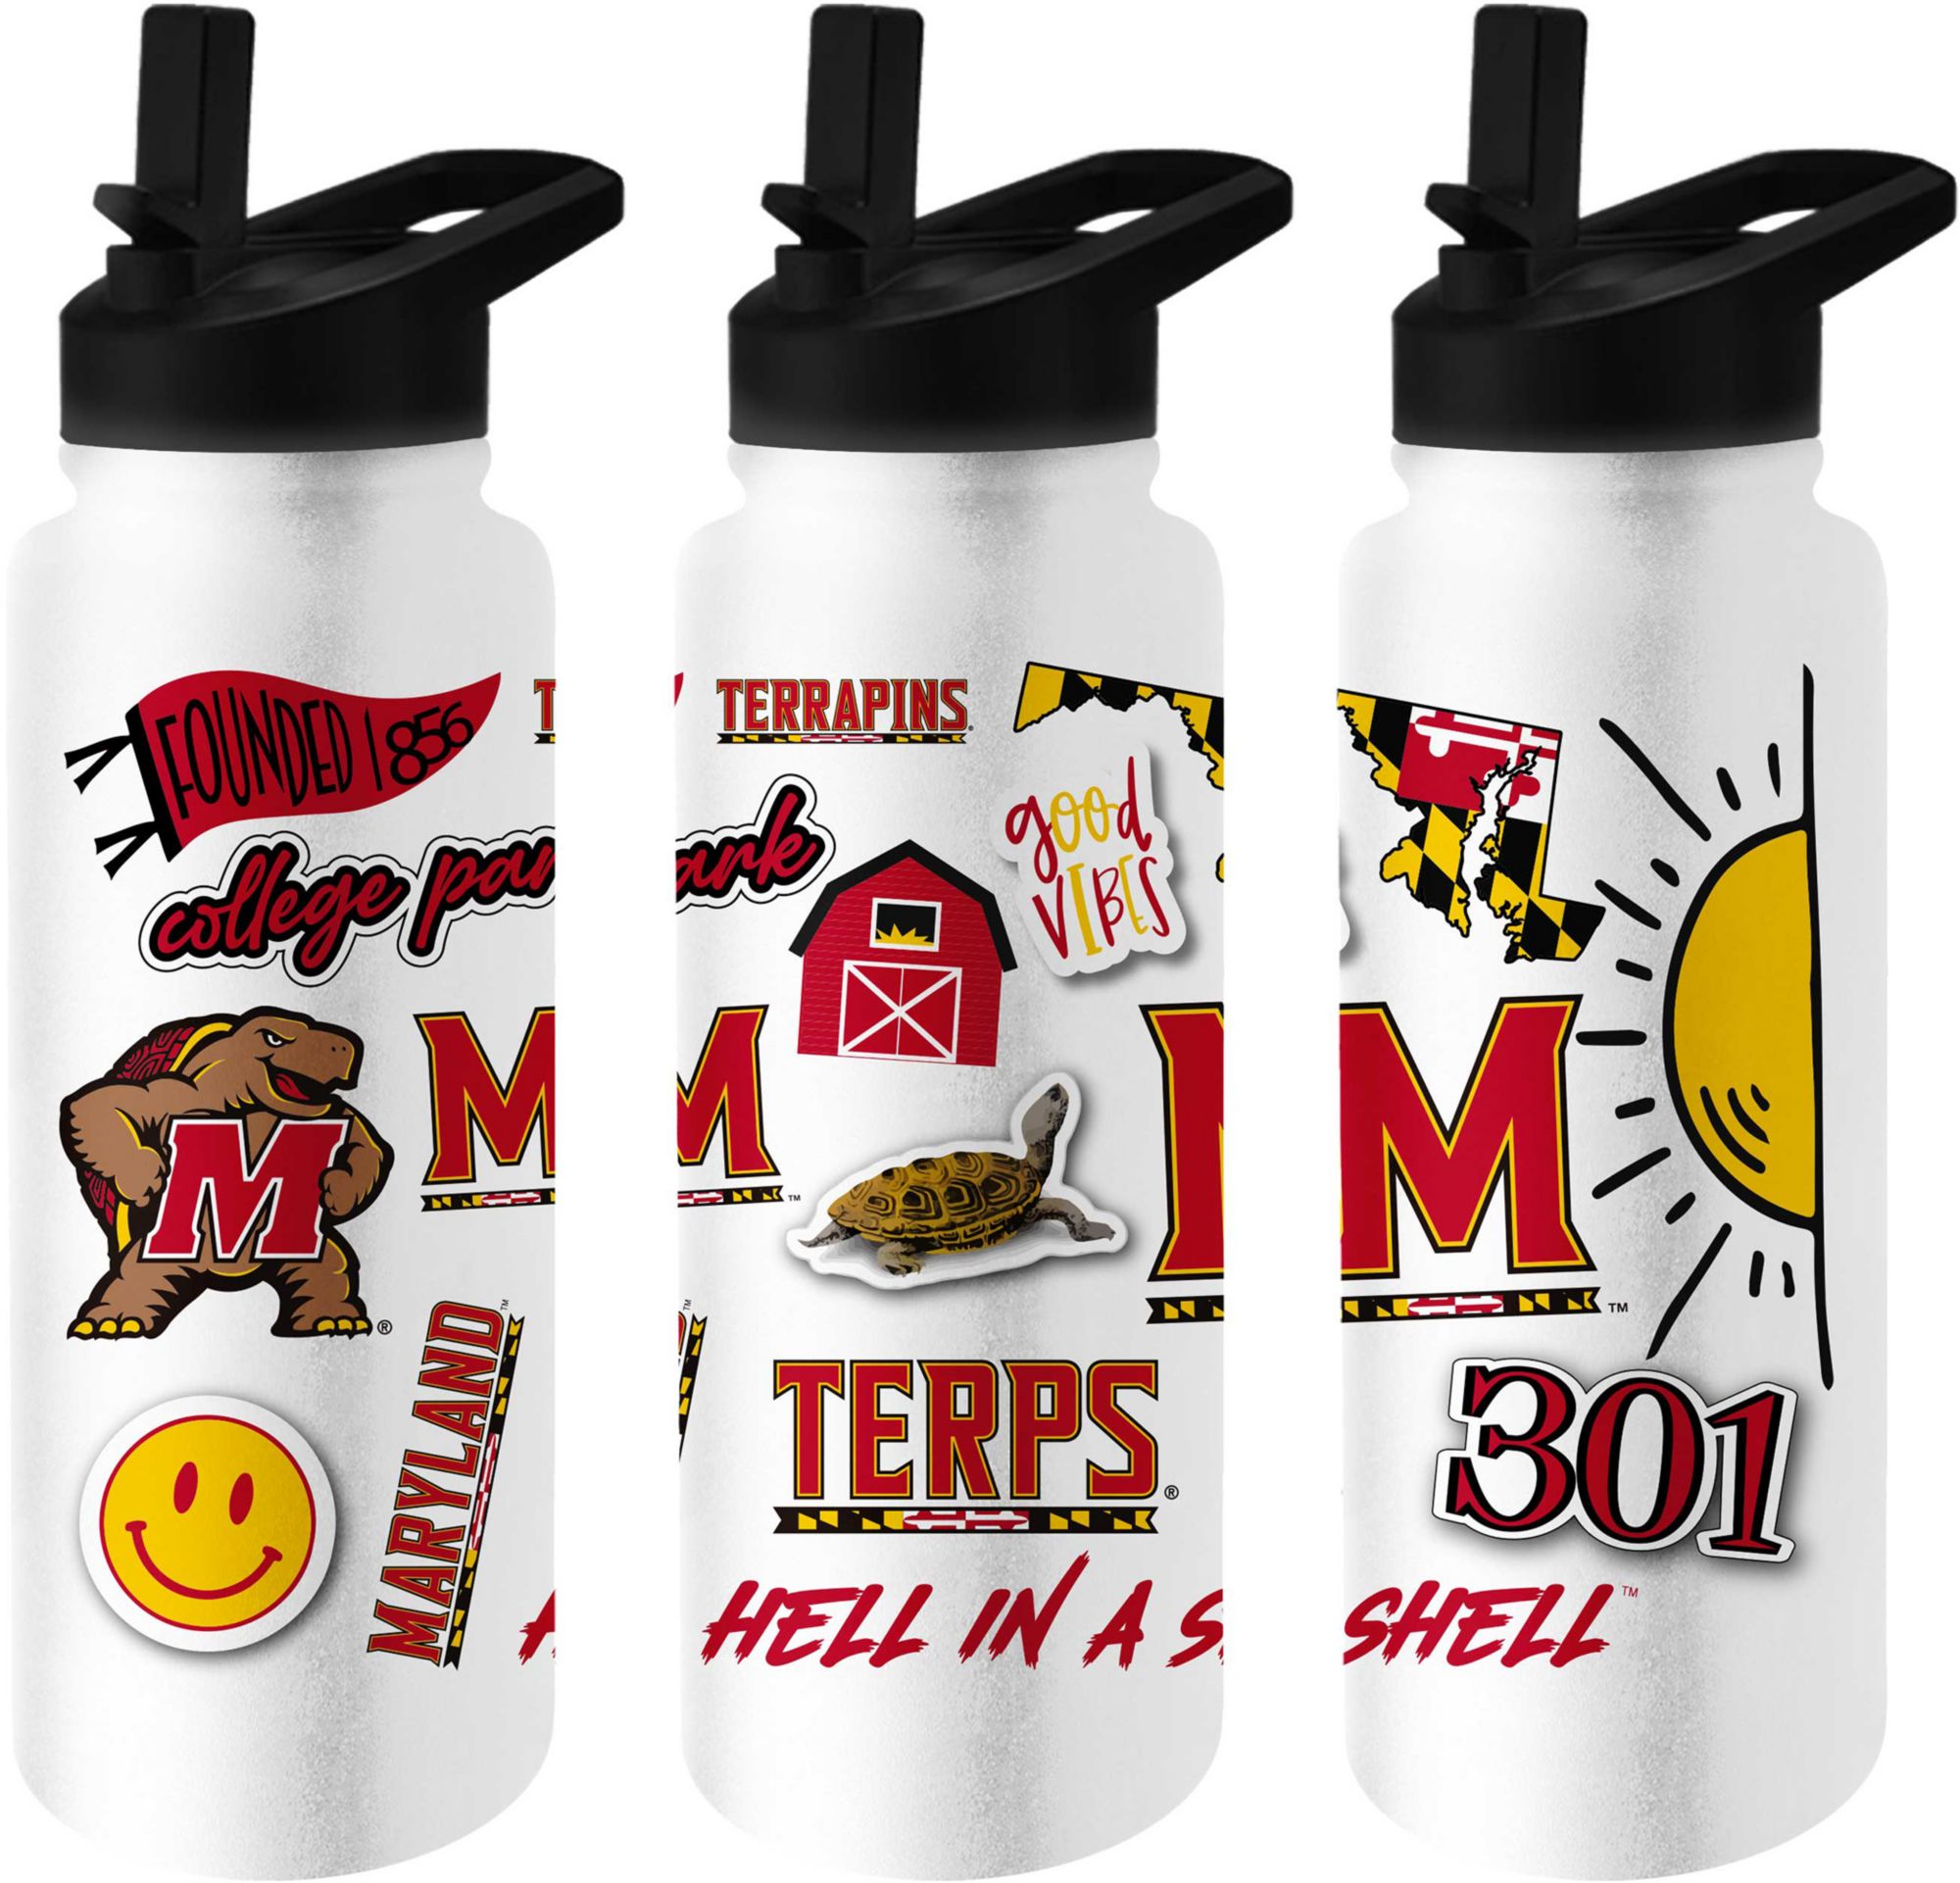 Maryland Terrapins swimming gifts